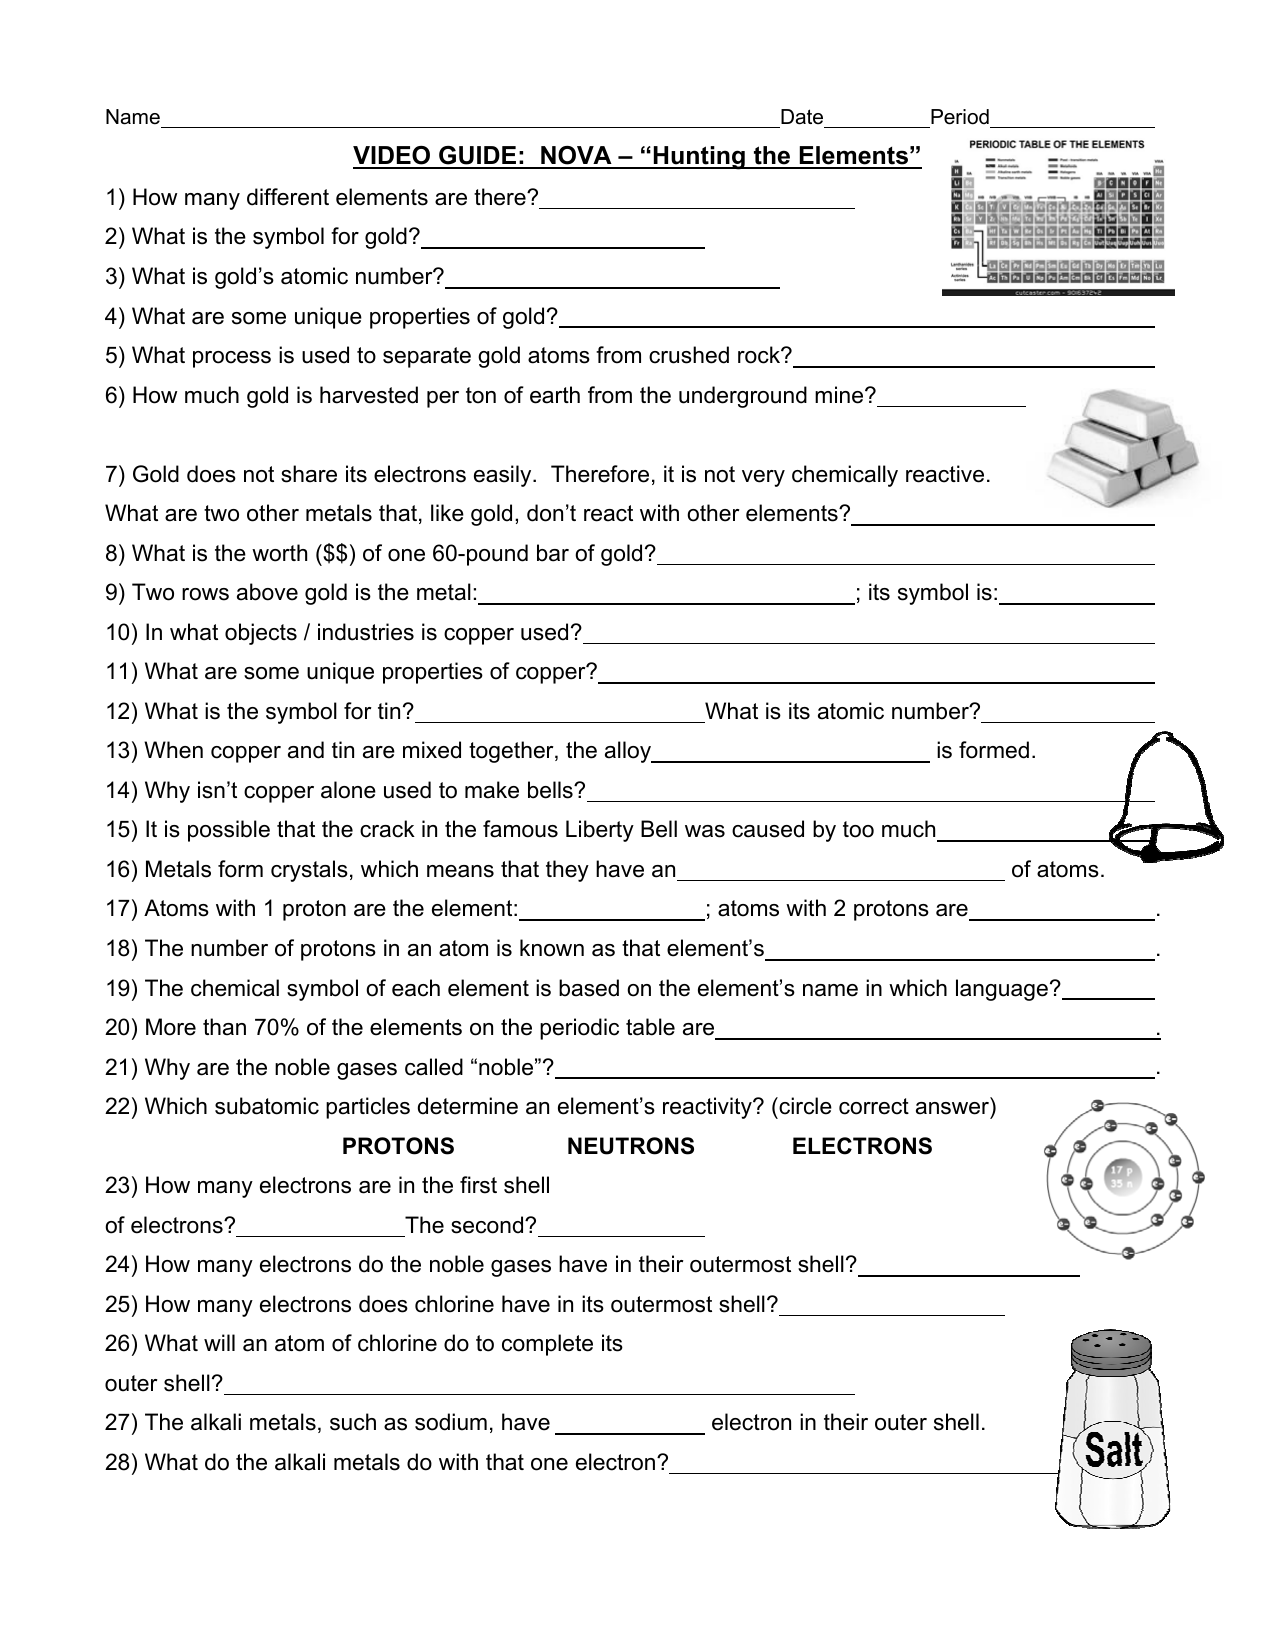 HuntingtheElements (21) Pertaining To Hunting The Elements Worksheet Answers